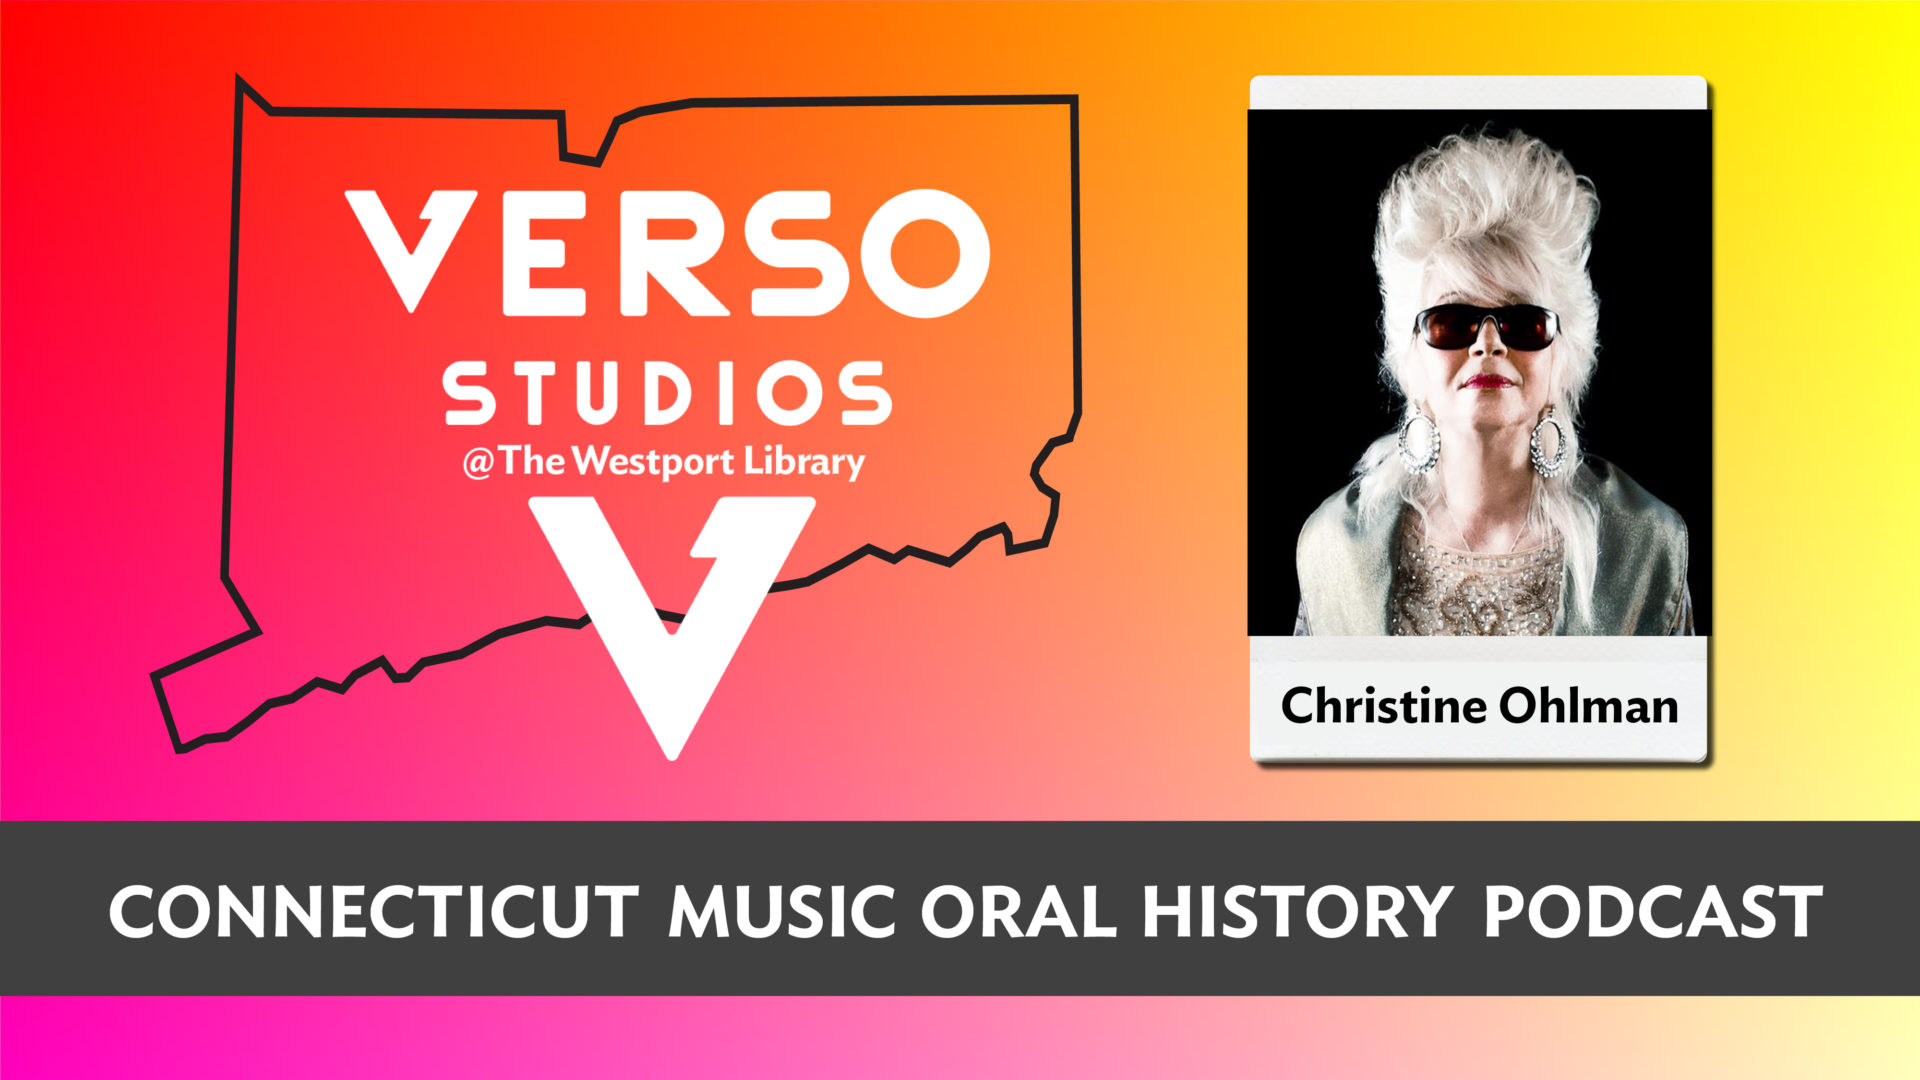 Christine Ohlman, Connecticut Music Oral History Podcast